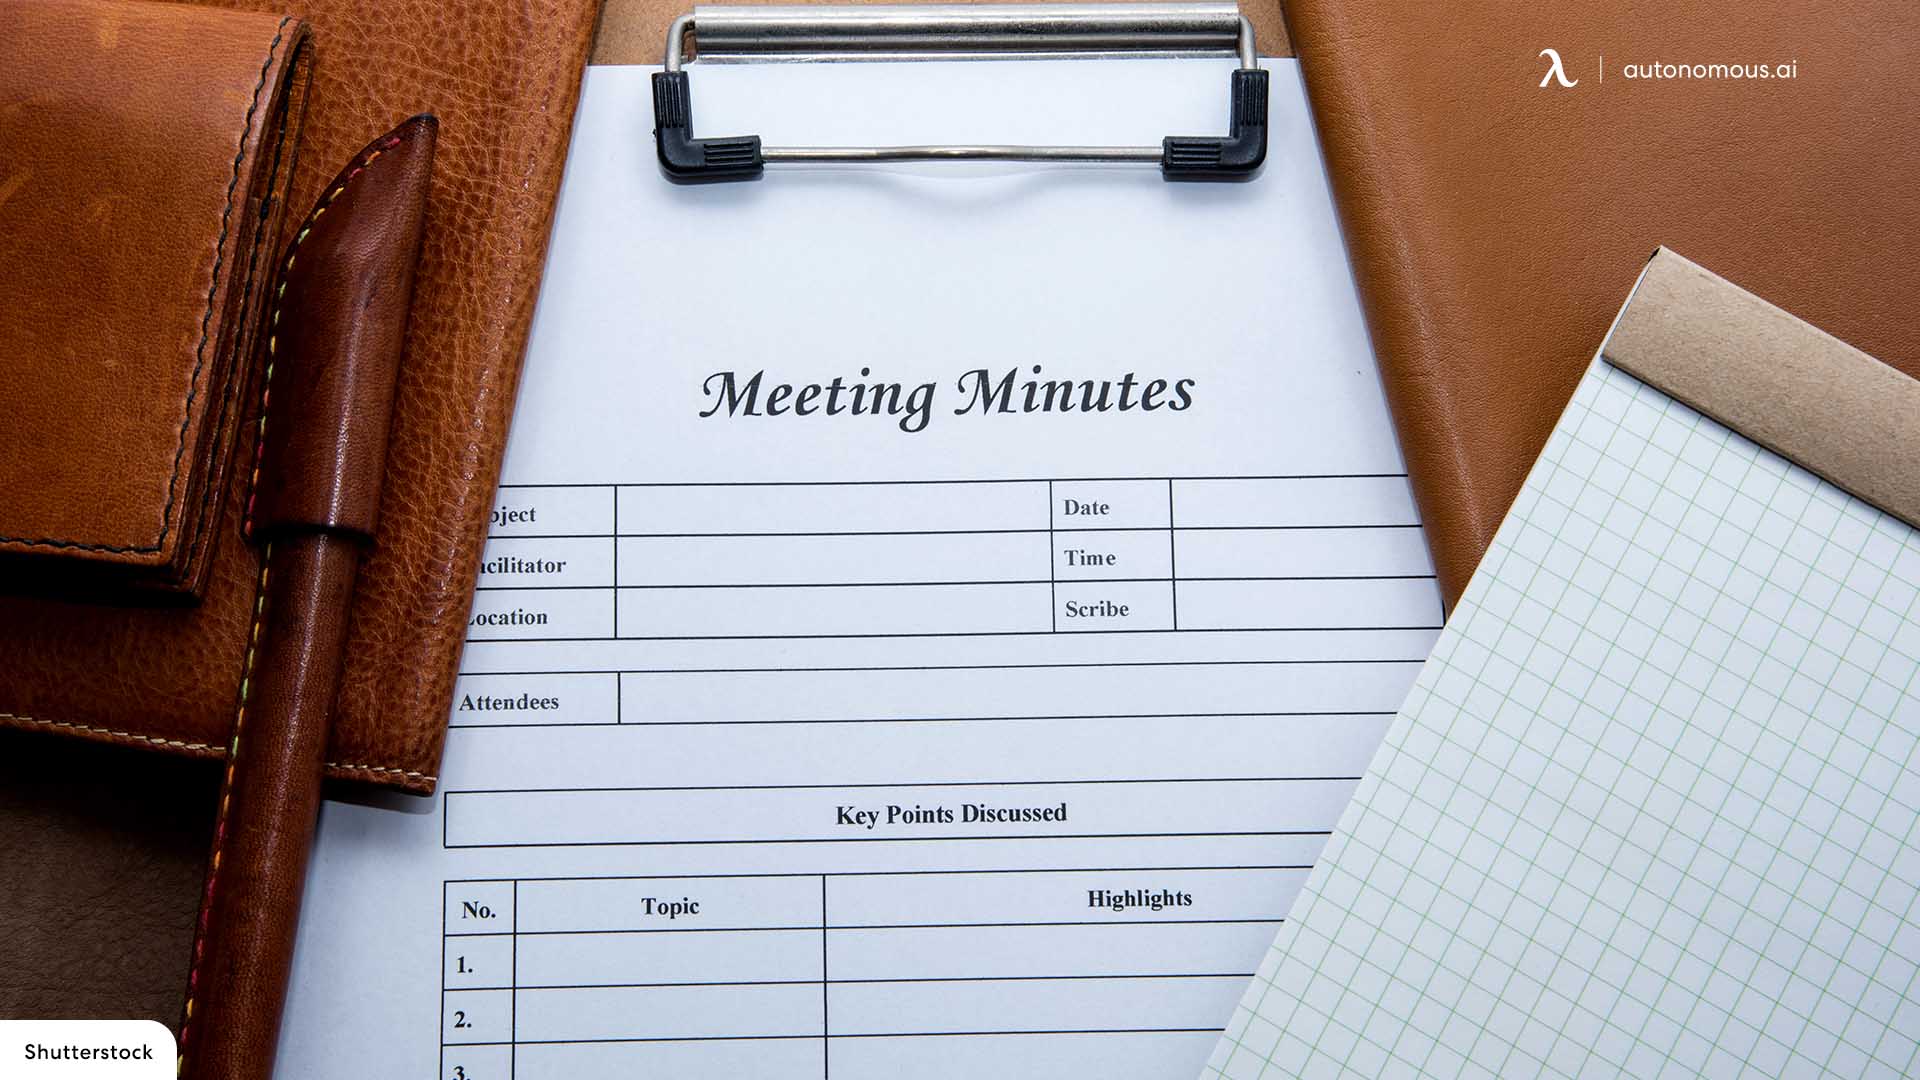 What are the meeting minutes?